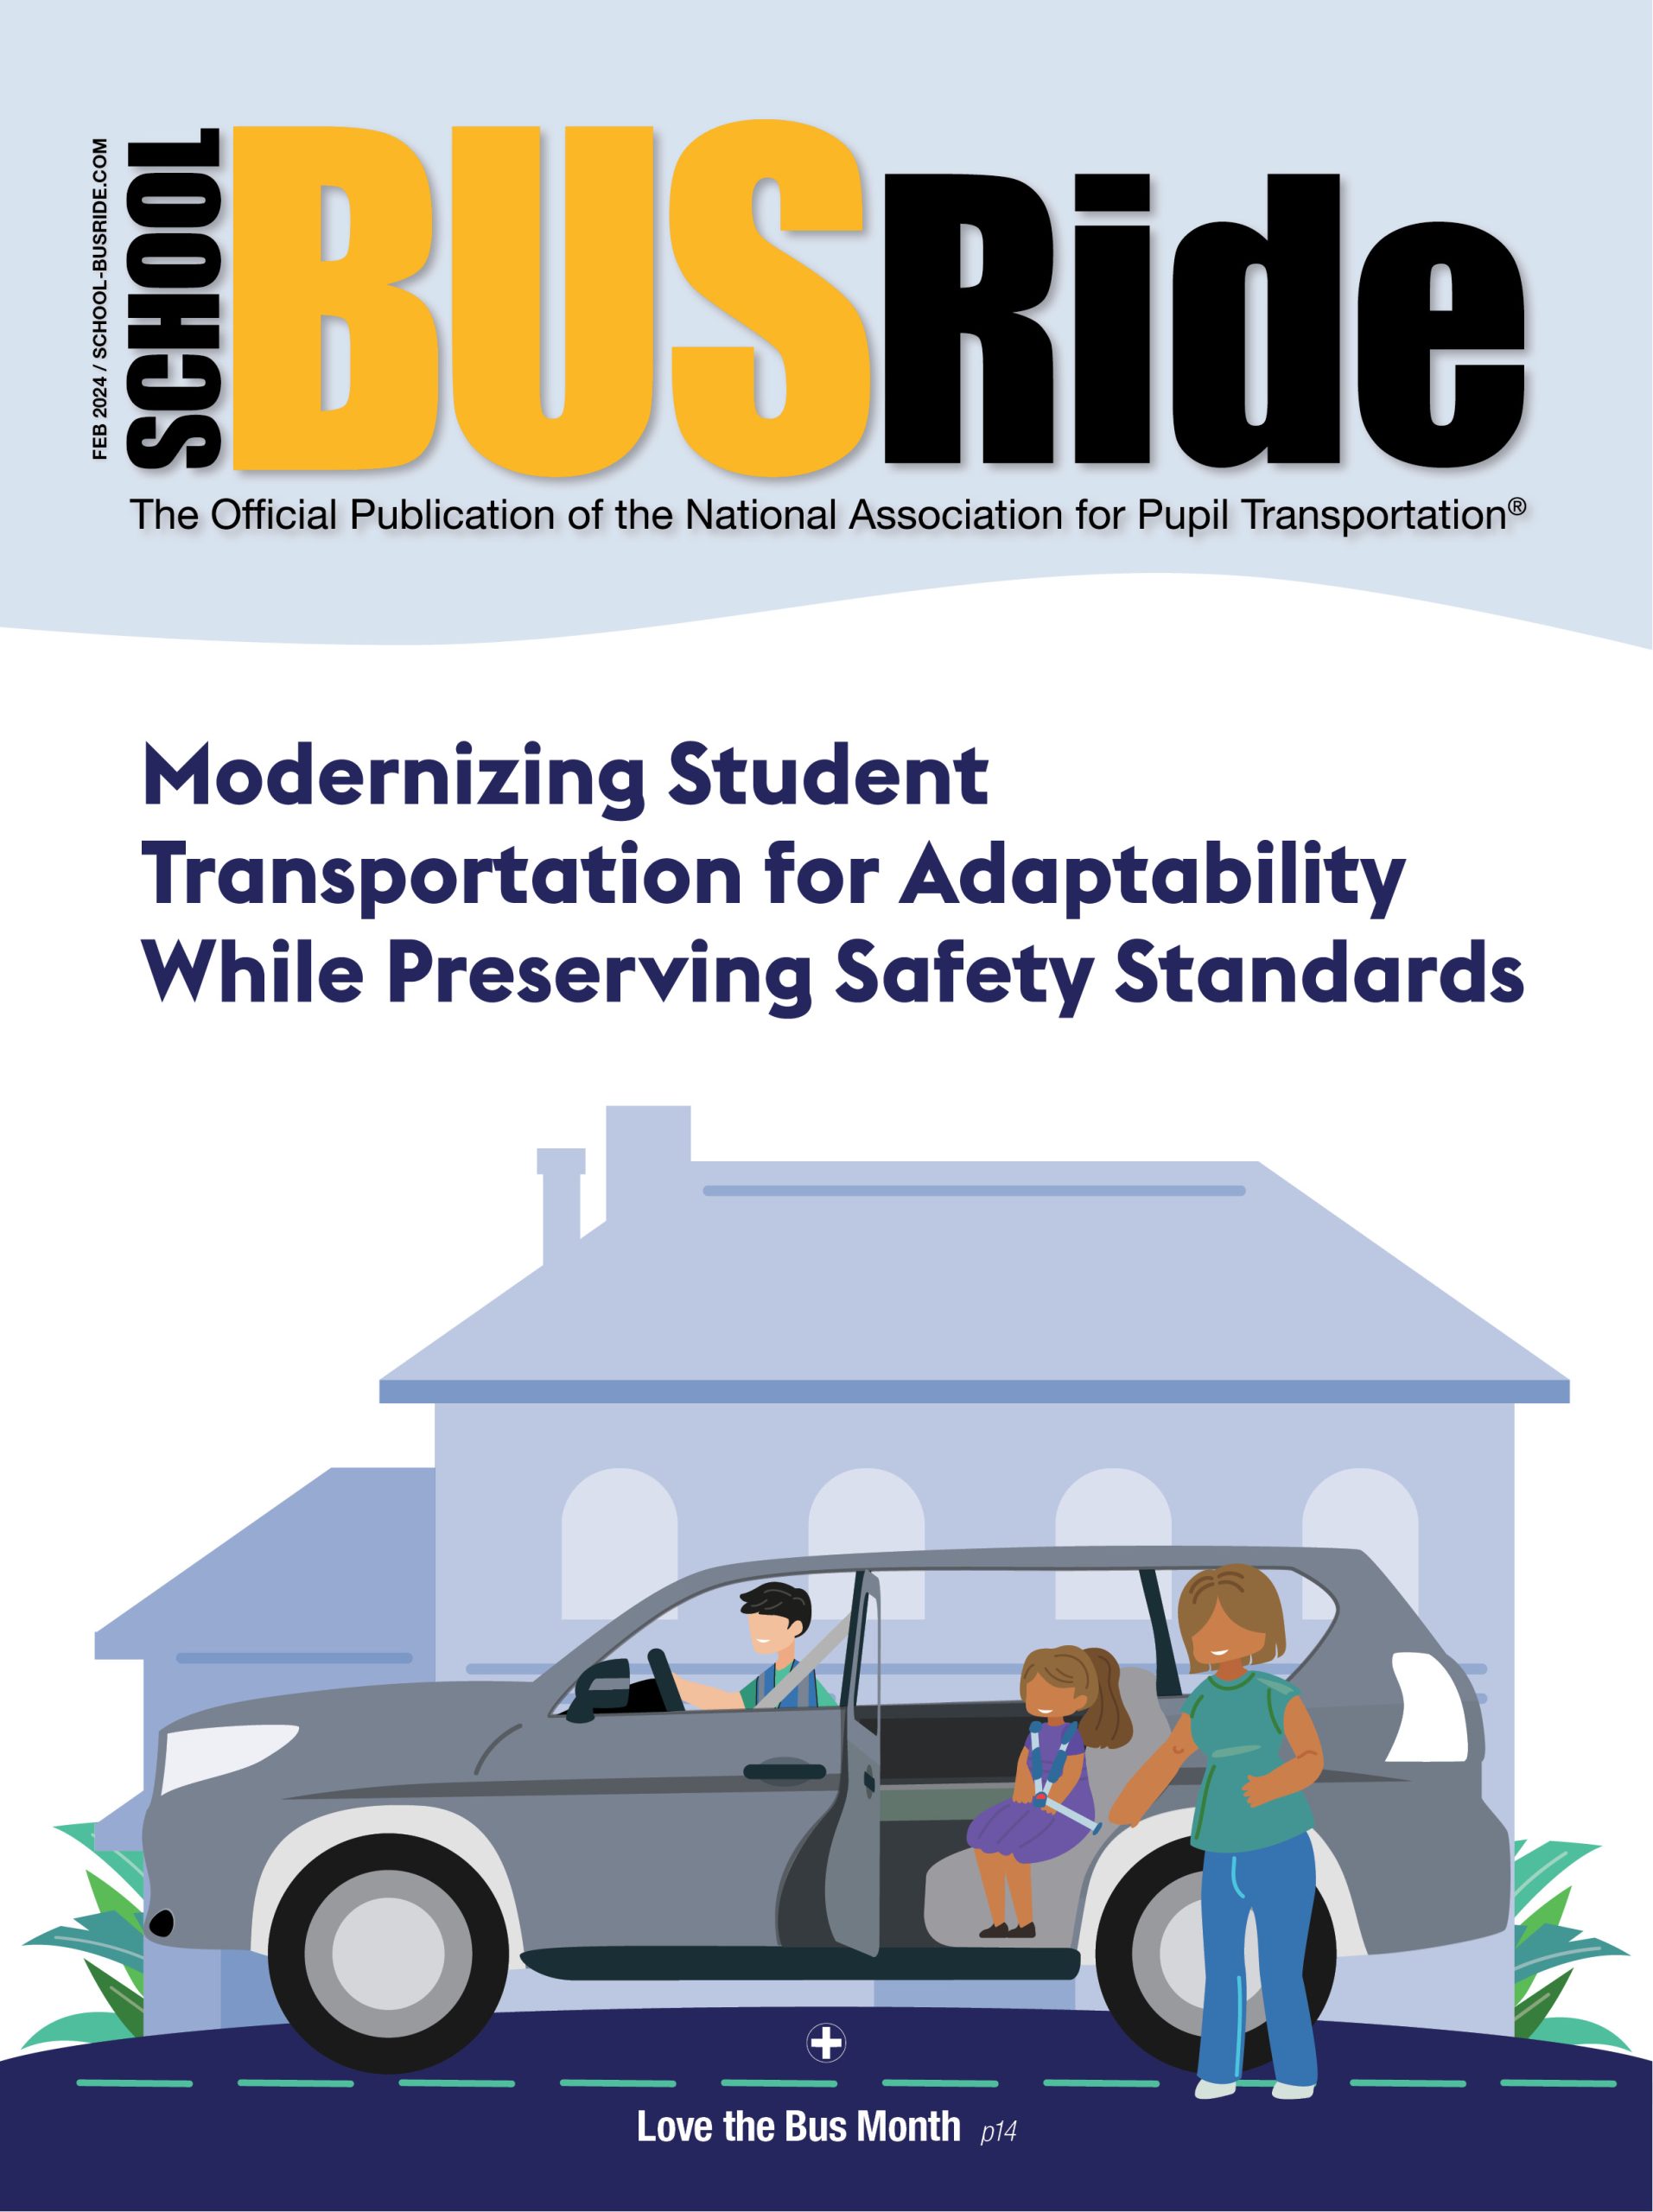 Modernizing Student Transportation for Adaptability While Preserving Safety Standards